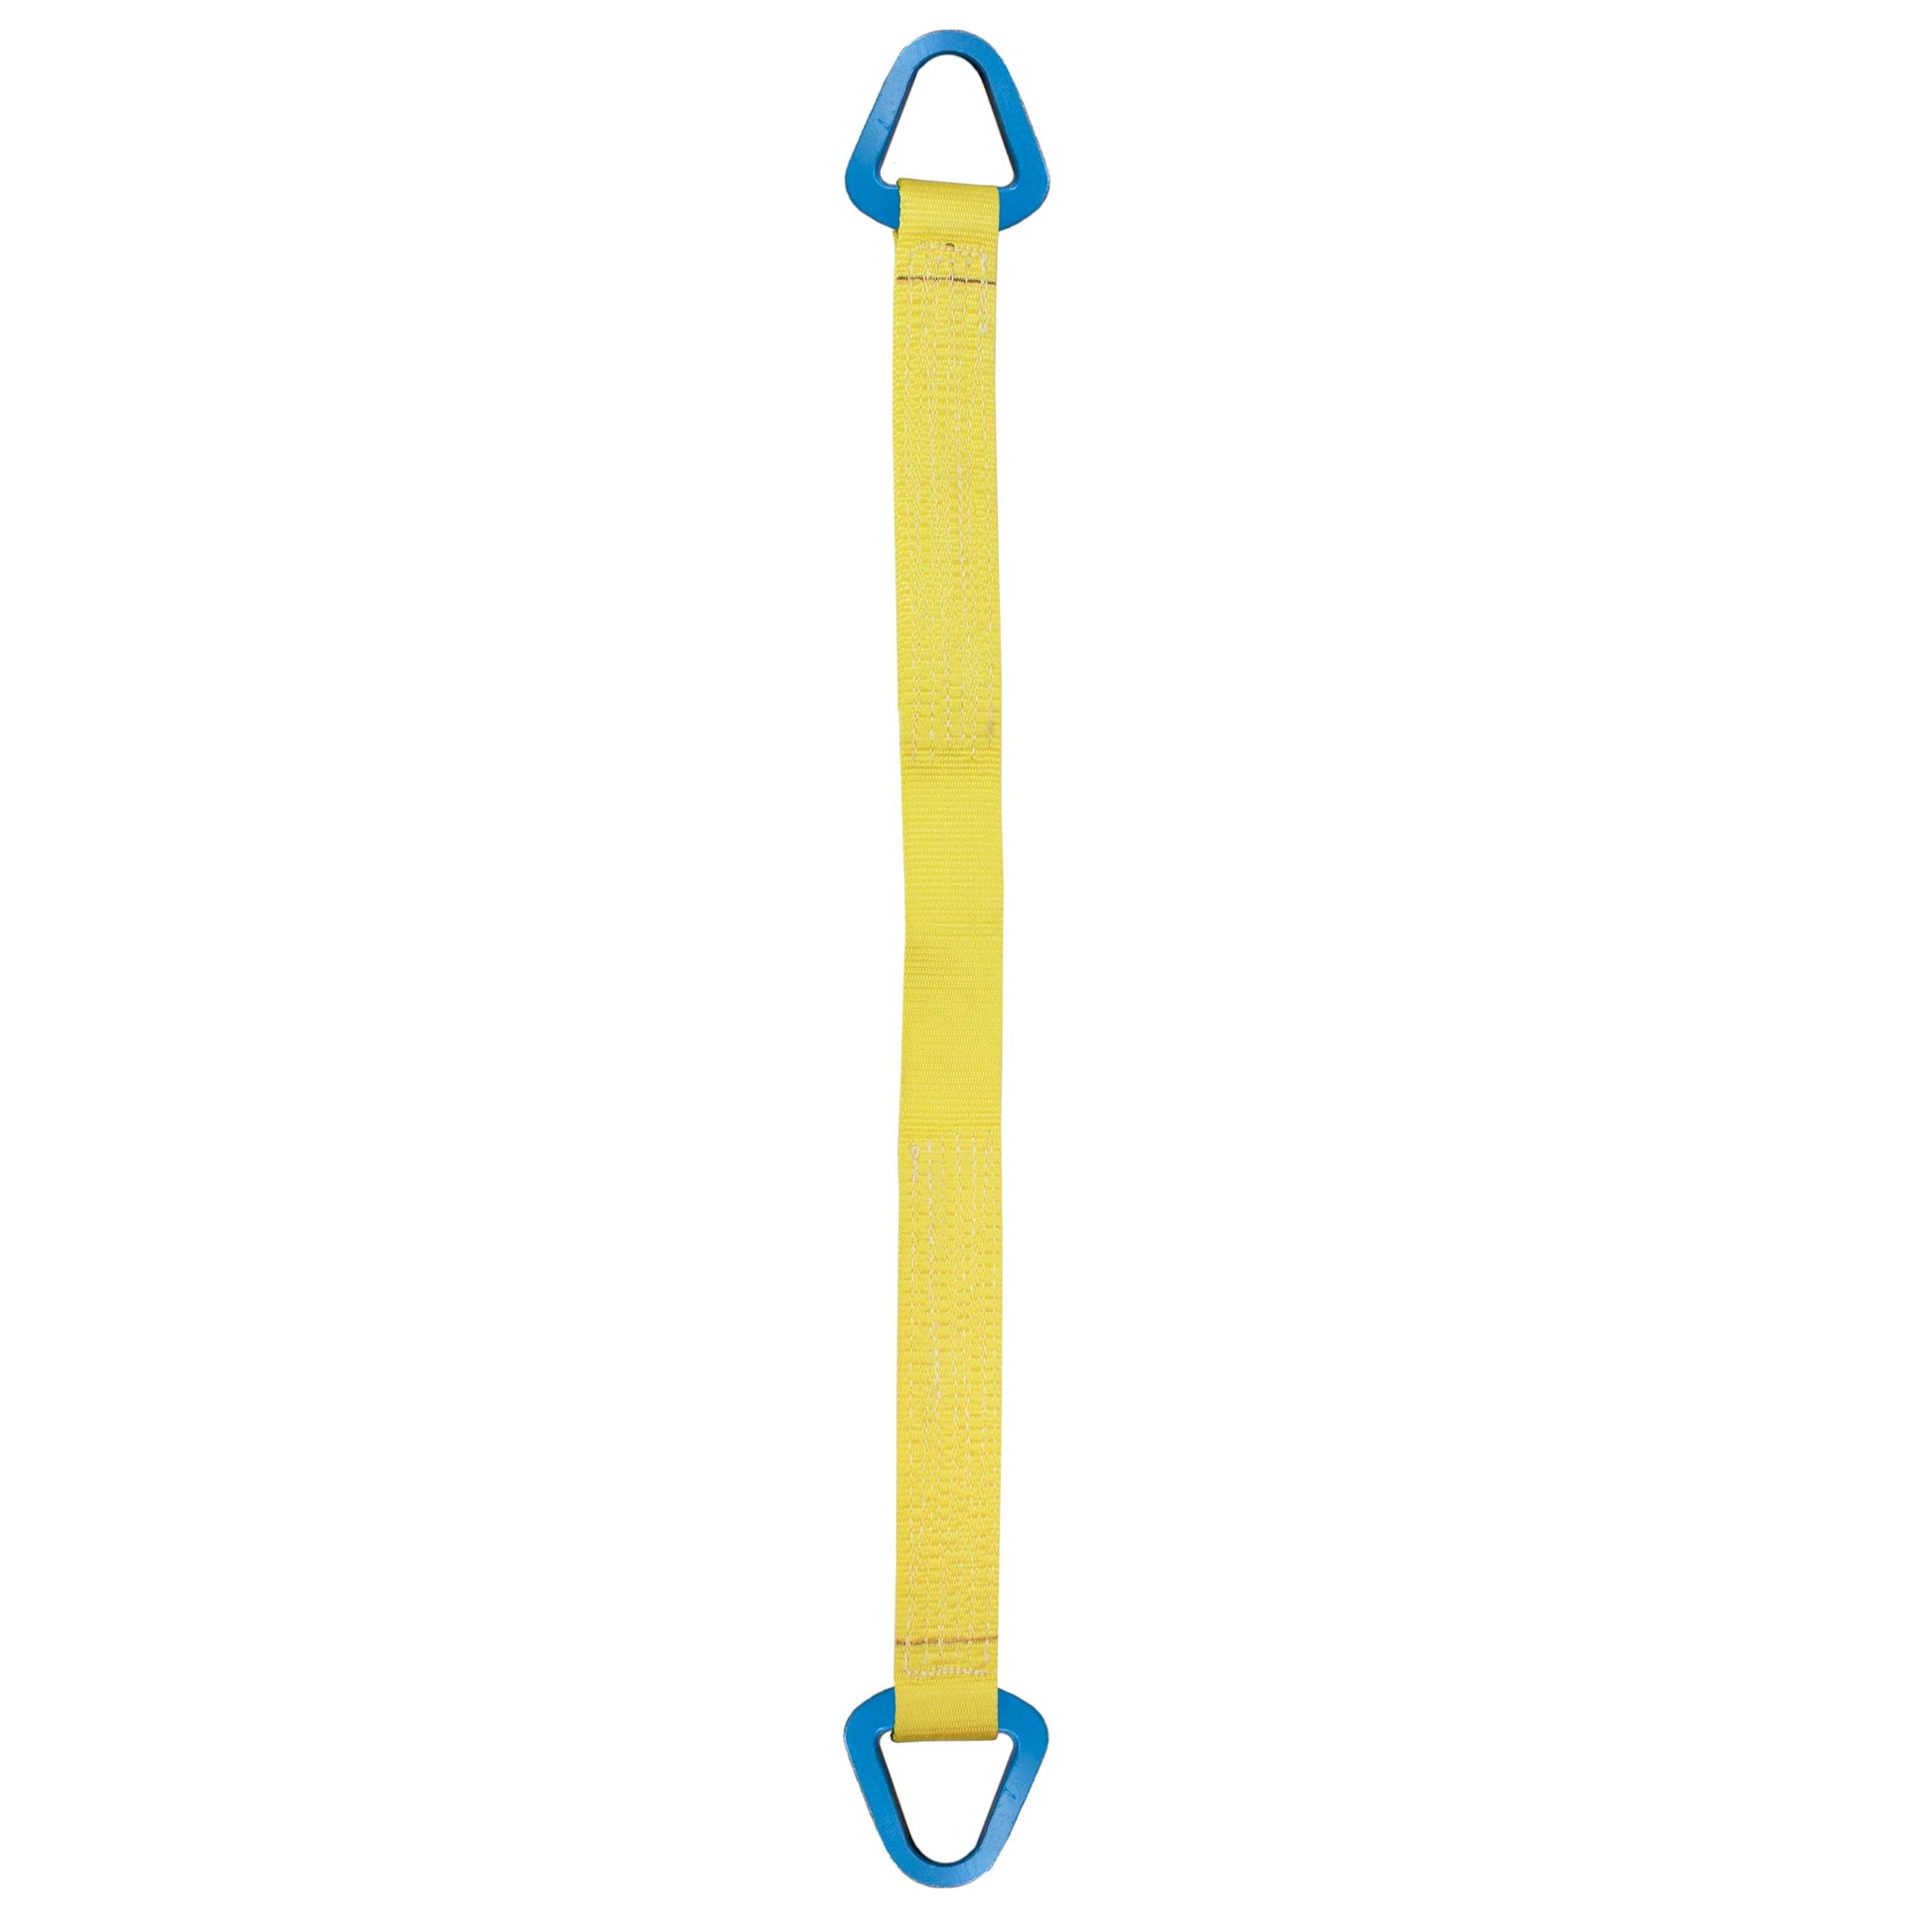 Nylon Lifting Sling Triangle 8 inch x 8 foot 1ply image 1 of 2